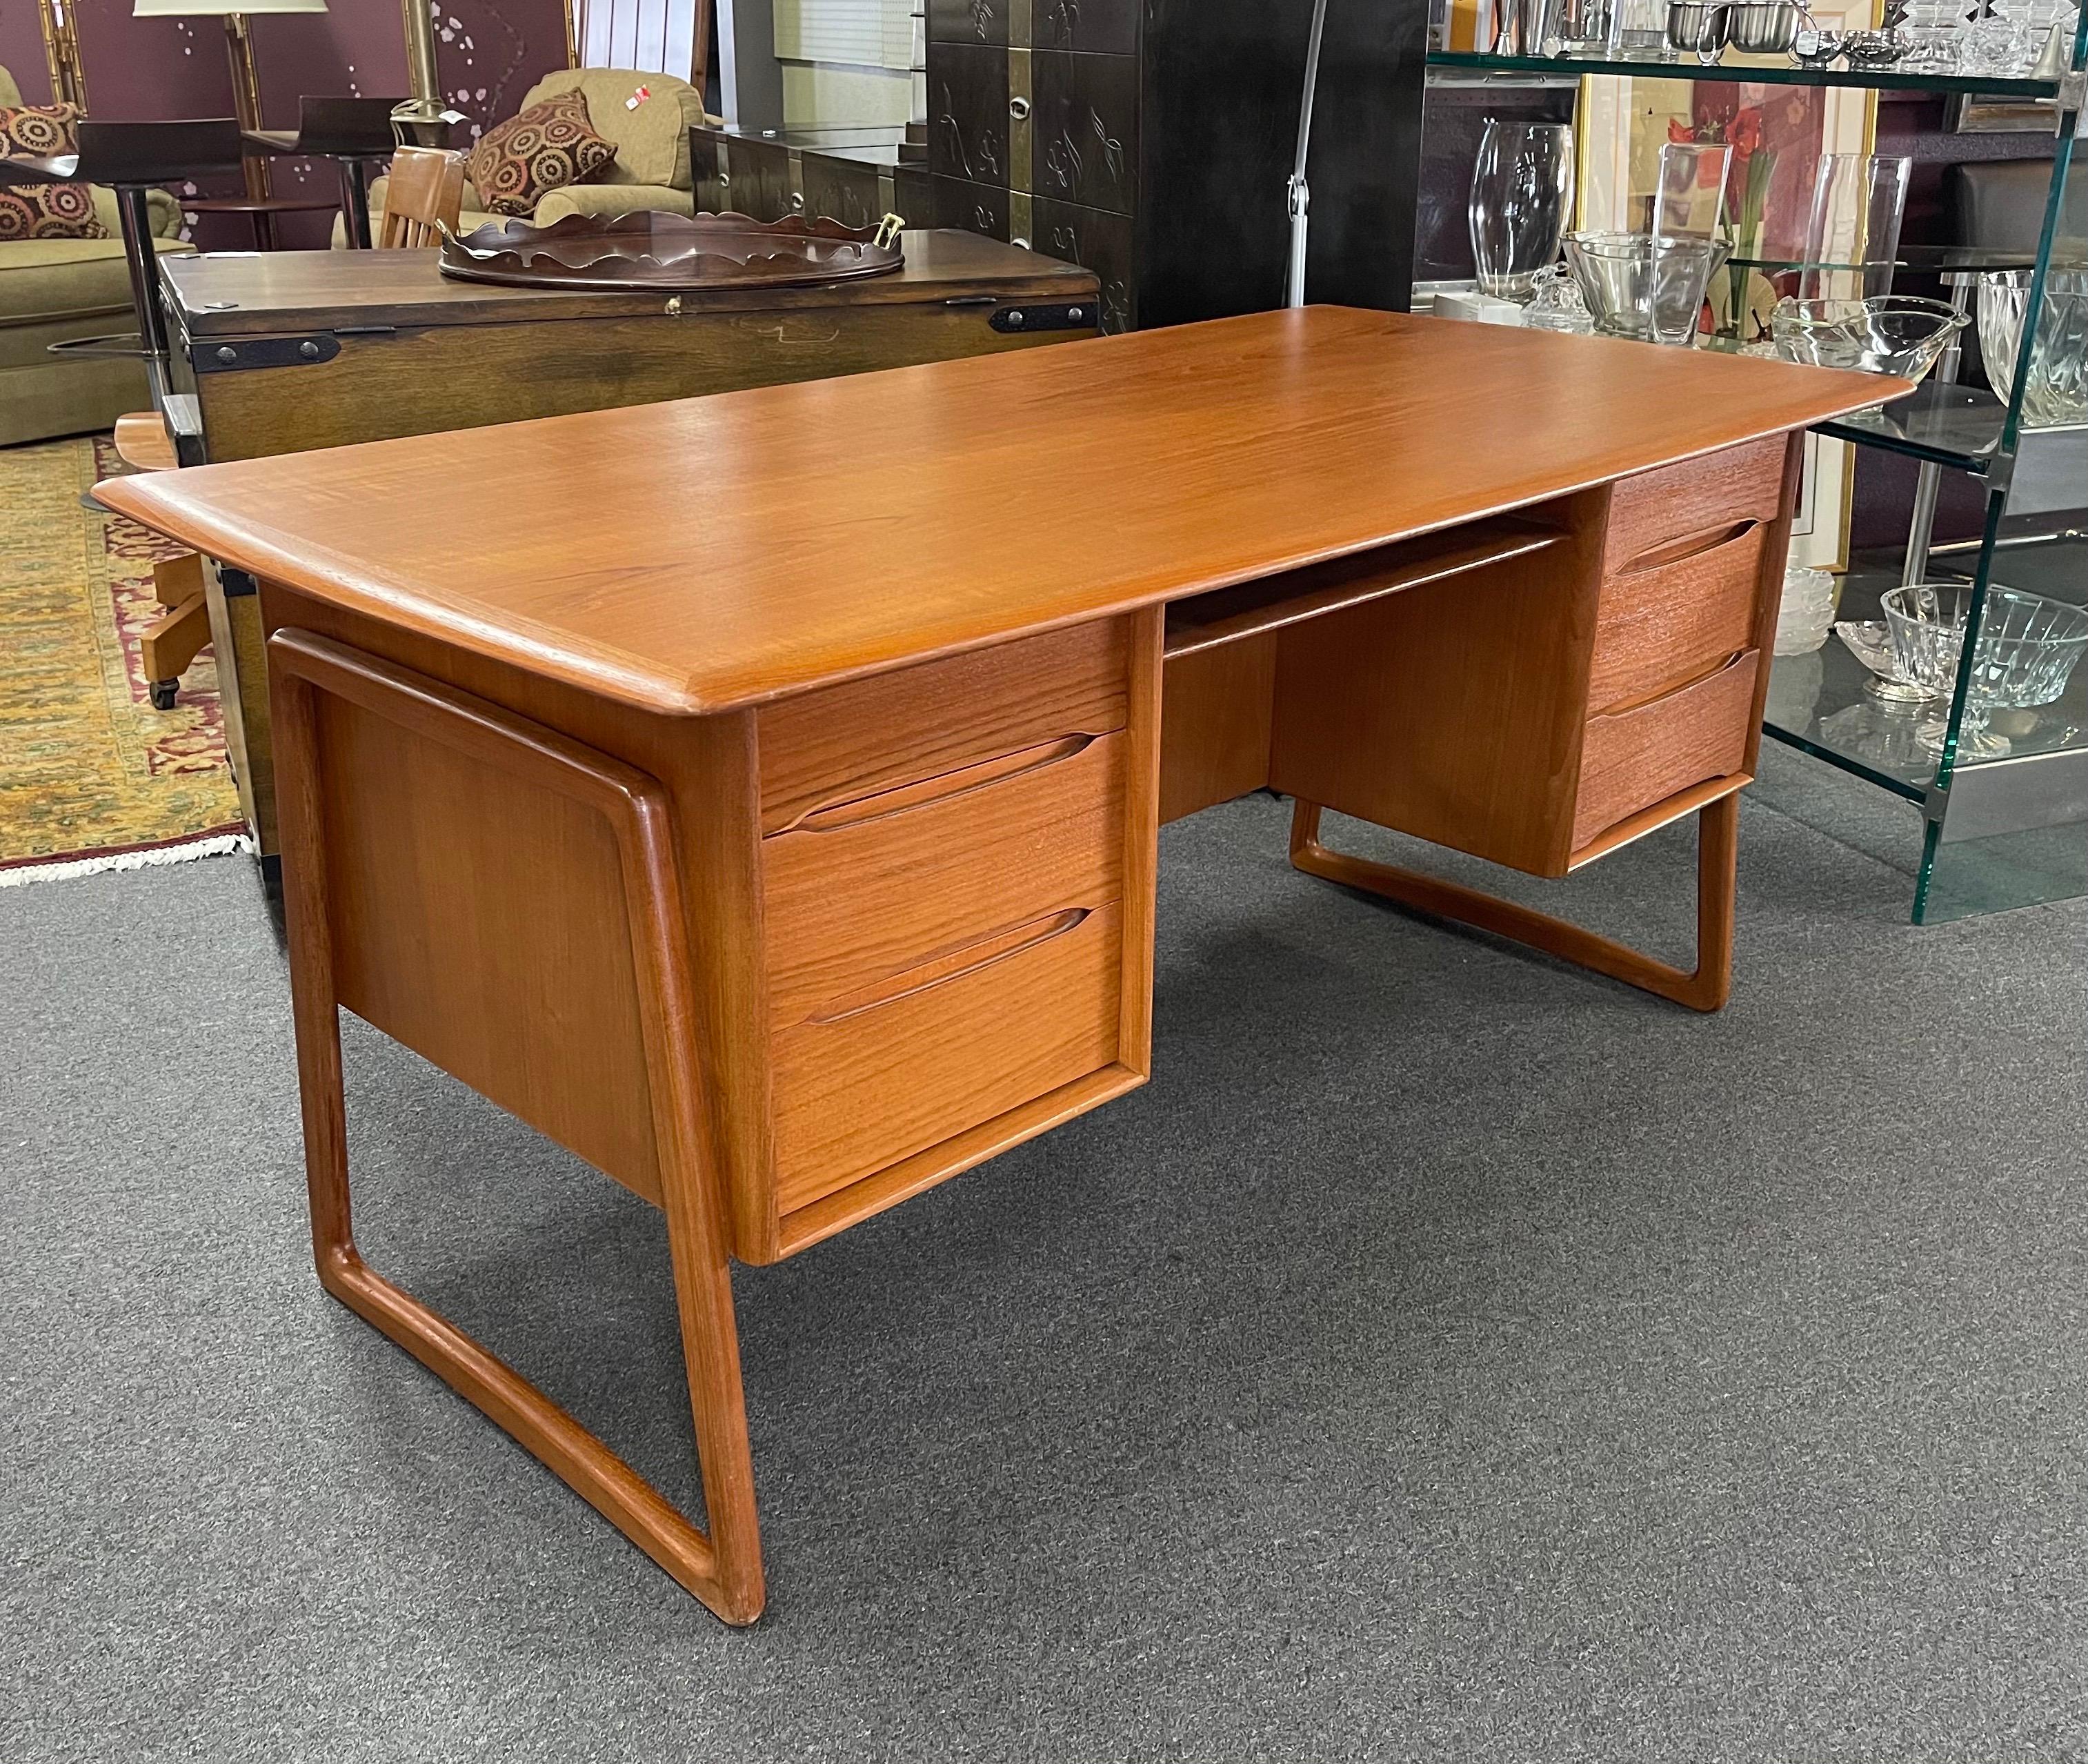 Iconic Danish modern executive desk in teak by Svend Aage Madsen for Sigurd Hansen, circa 1950s. The front features six dove tailed storage drawers while the backside shows an open and fully finished compartment offering plenty of book storage and